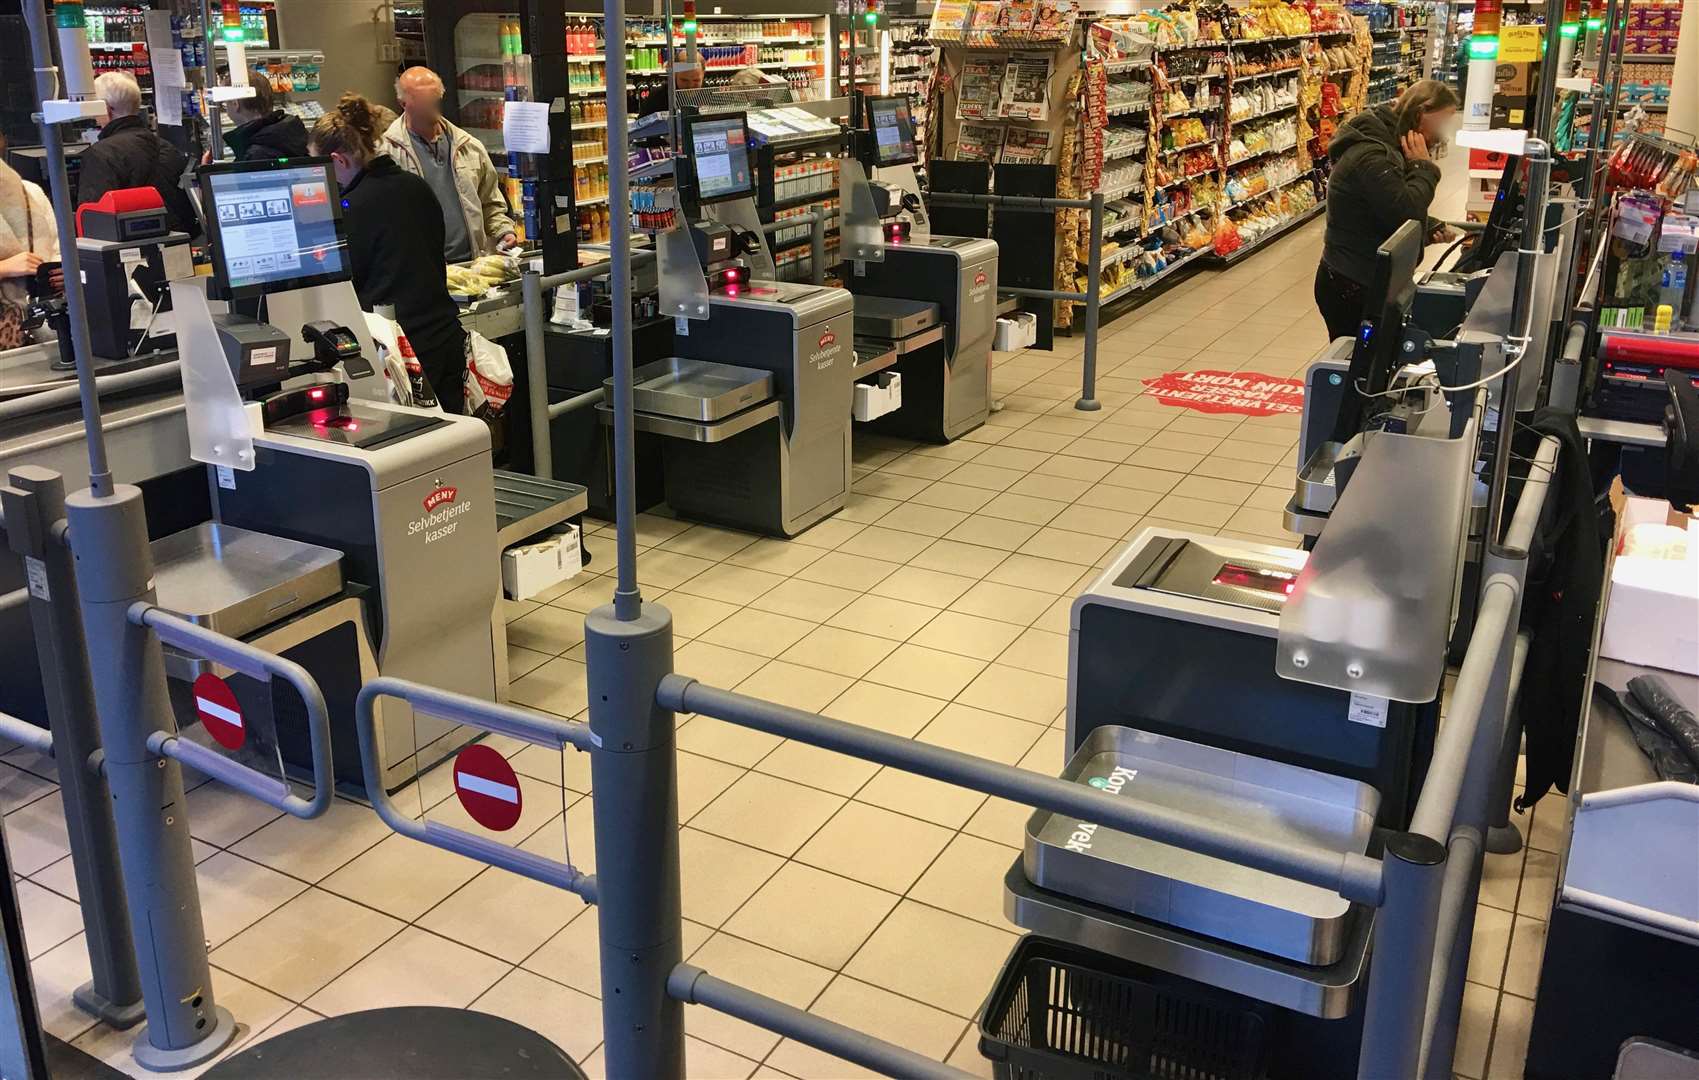 Self-service checkouts are becoming commonplace in stores